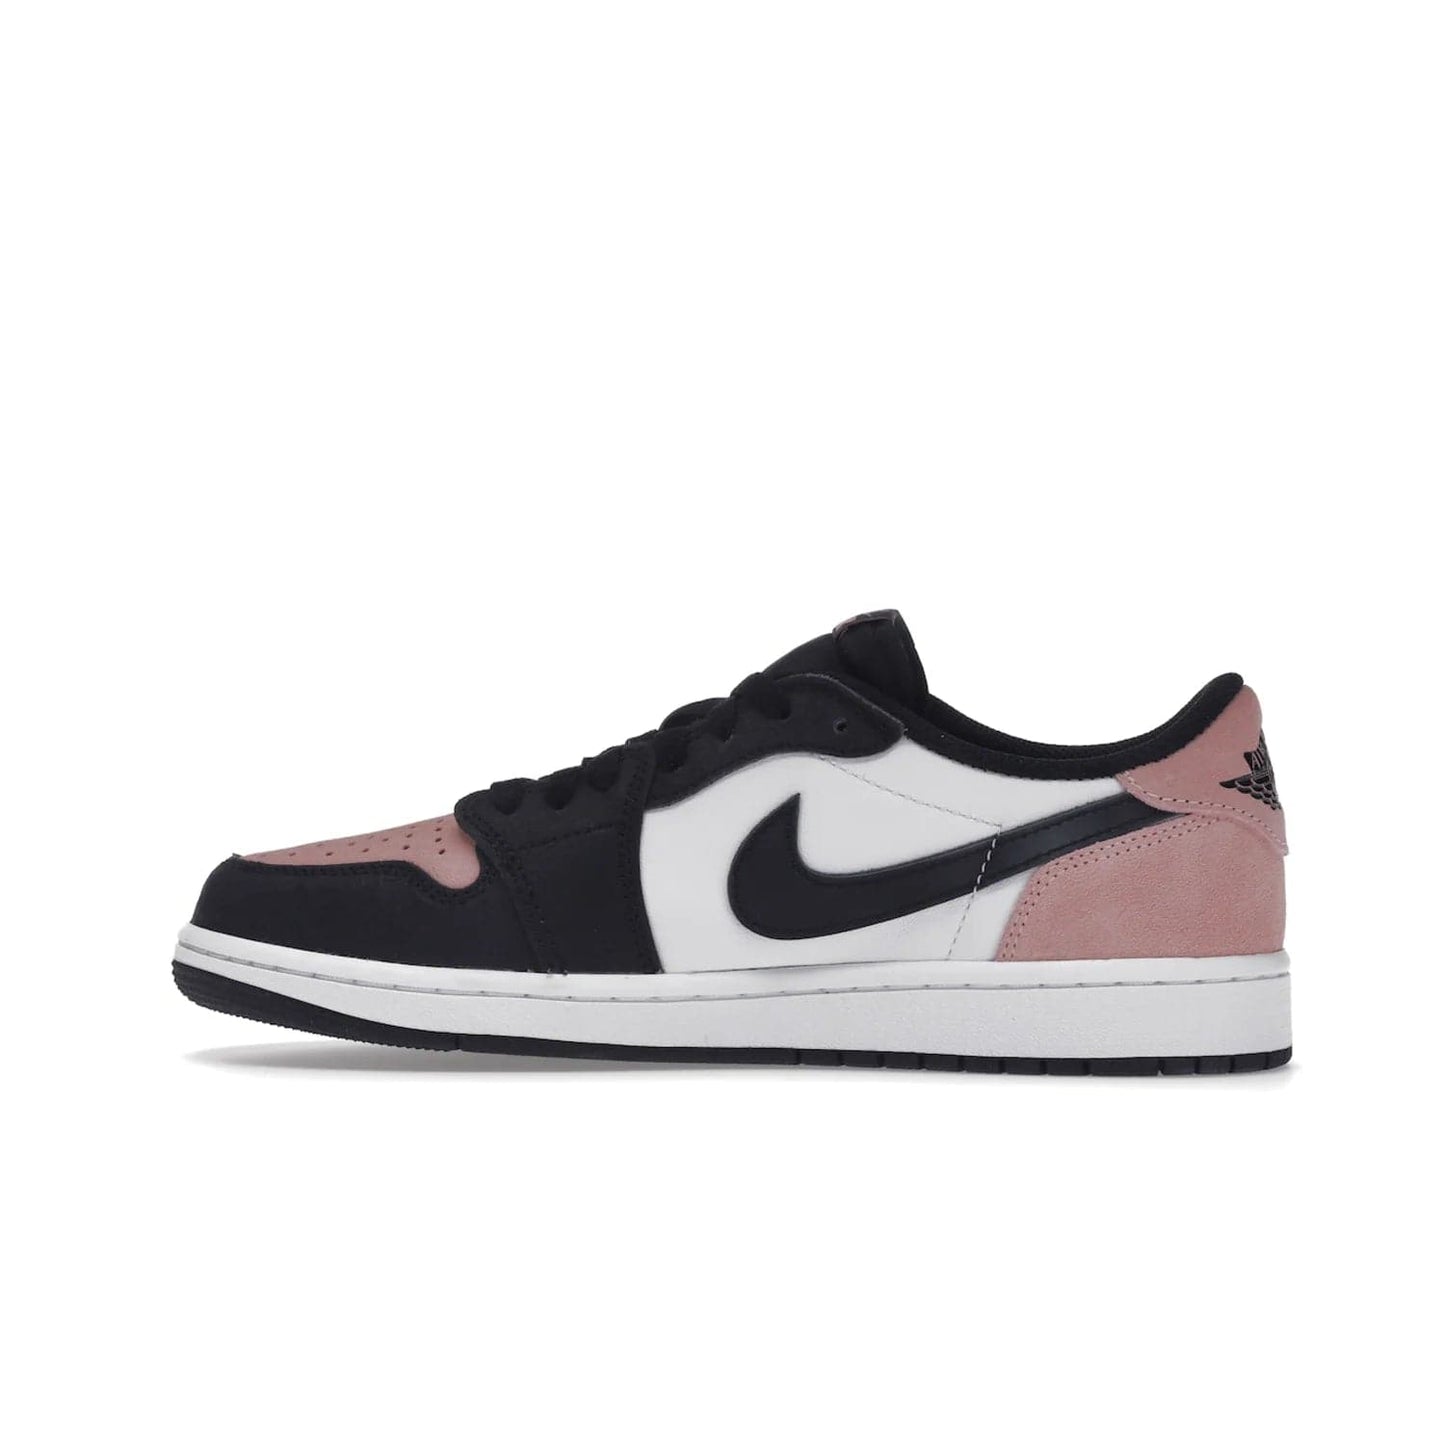 Jordan 1 Low OG Bleached Coral - Image 20 - Only at www.BallersClubKickz.com - Introducing the Air Jordan 1 Low OG Bleached Coral. Constructed with white leather, black cracked leather & Bleached Coral suede. Signature Jordan Wings logo, white Air sole. Get the pack in July 2022 and stand out.